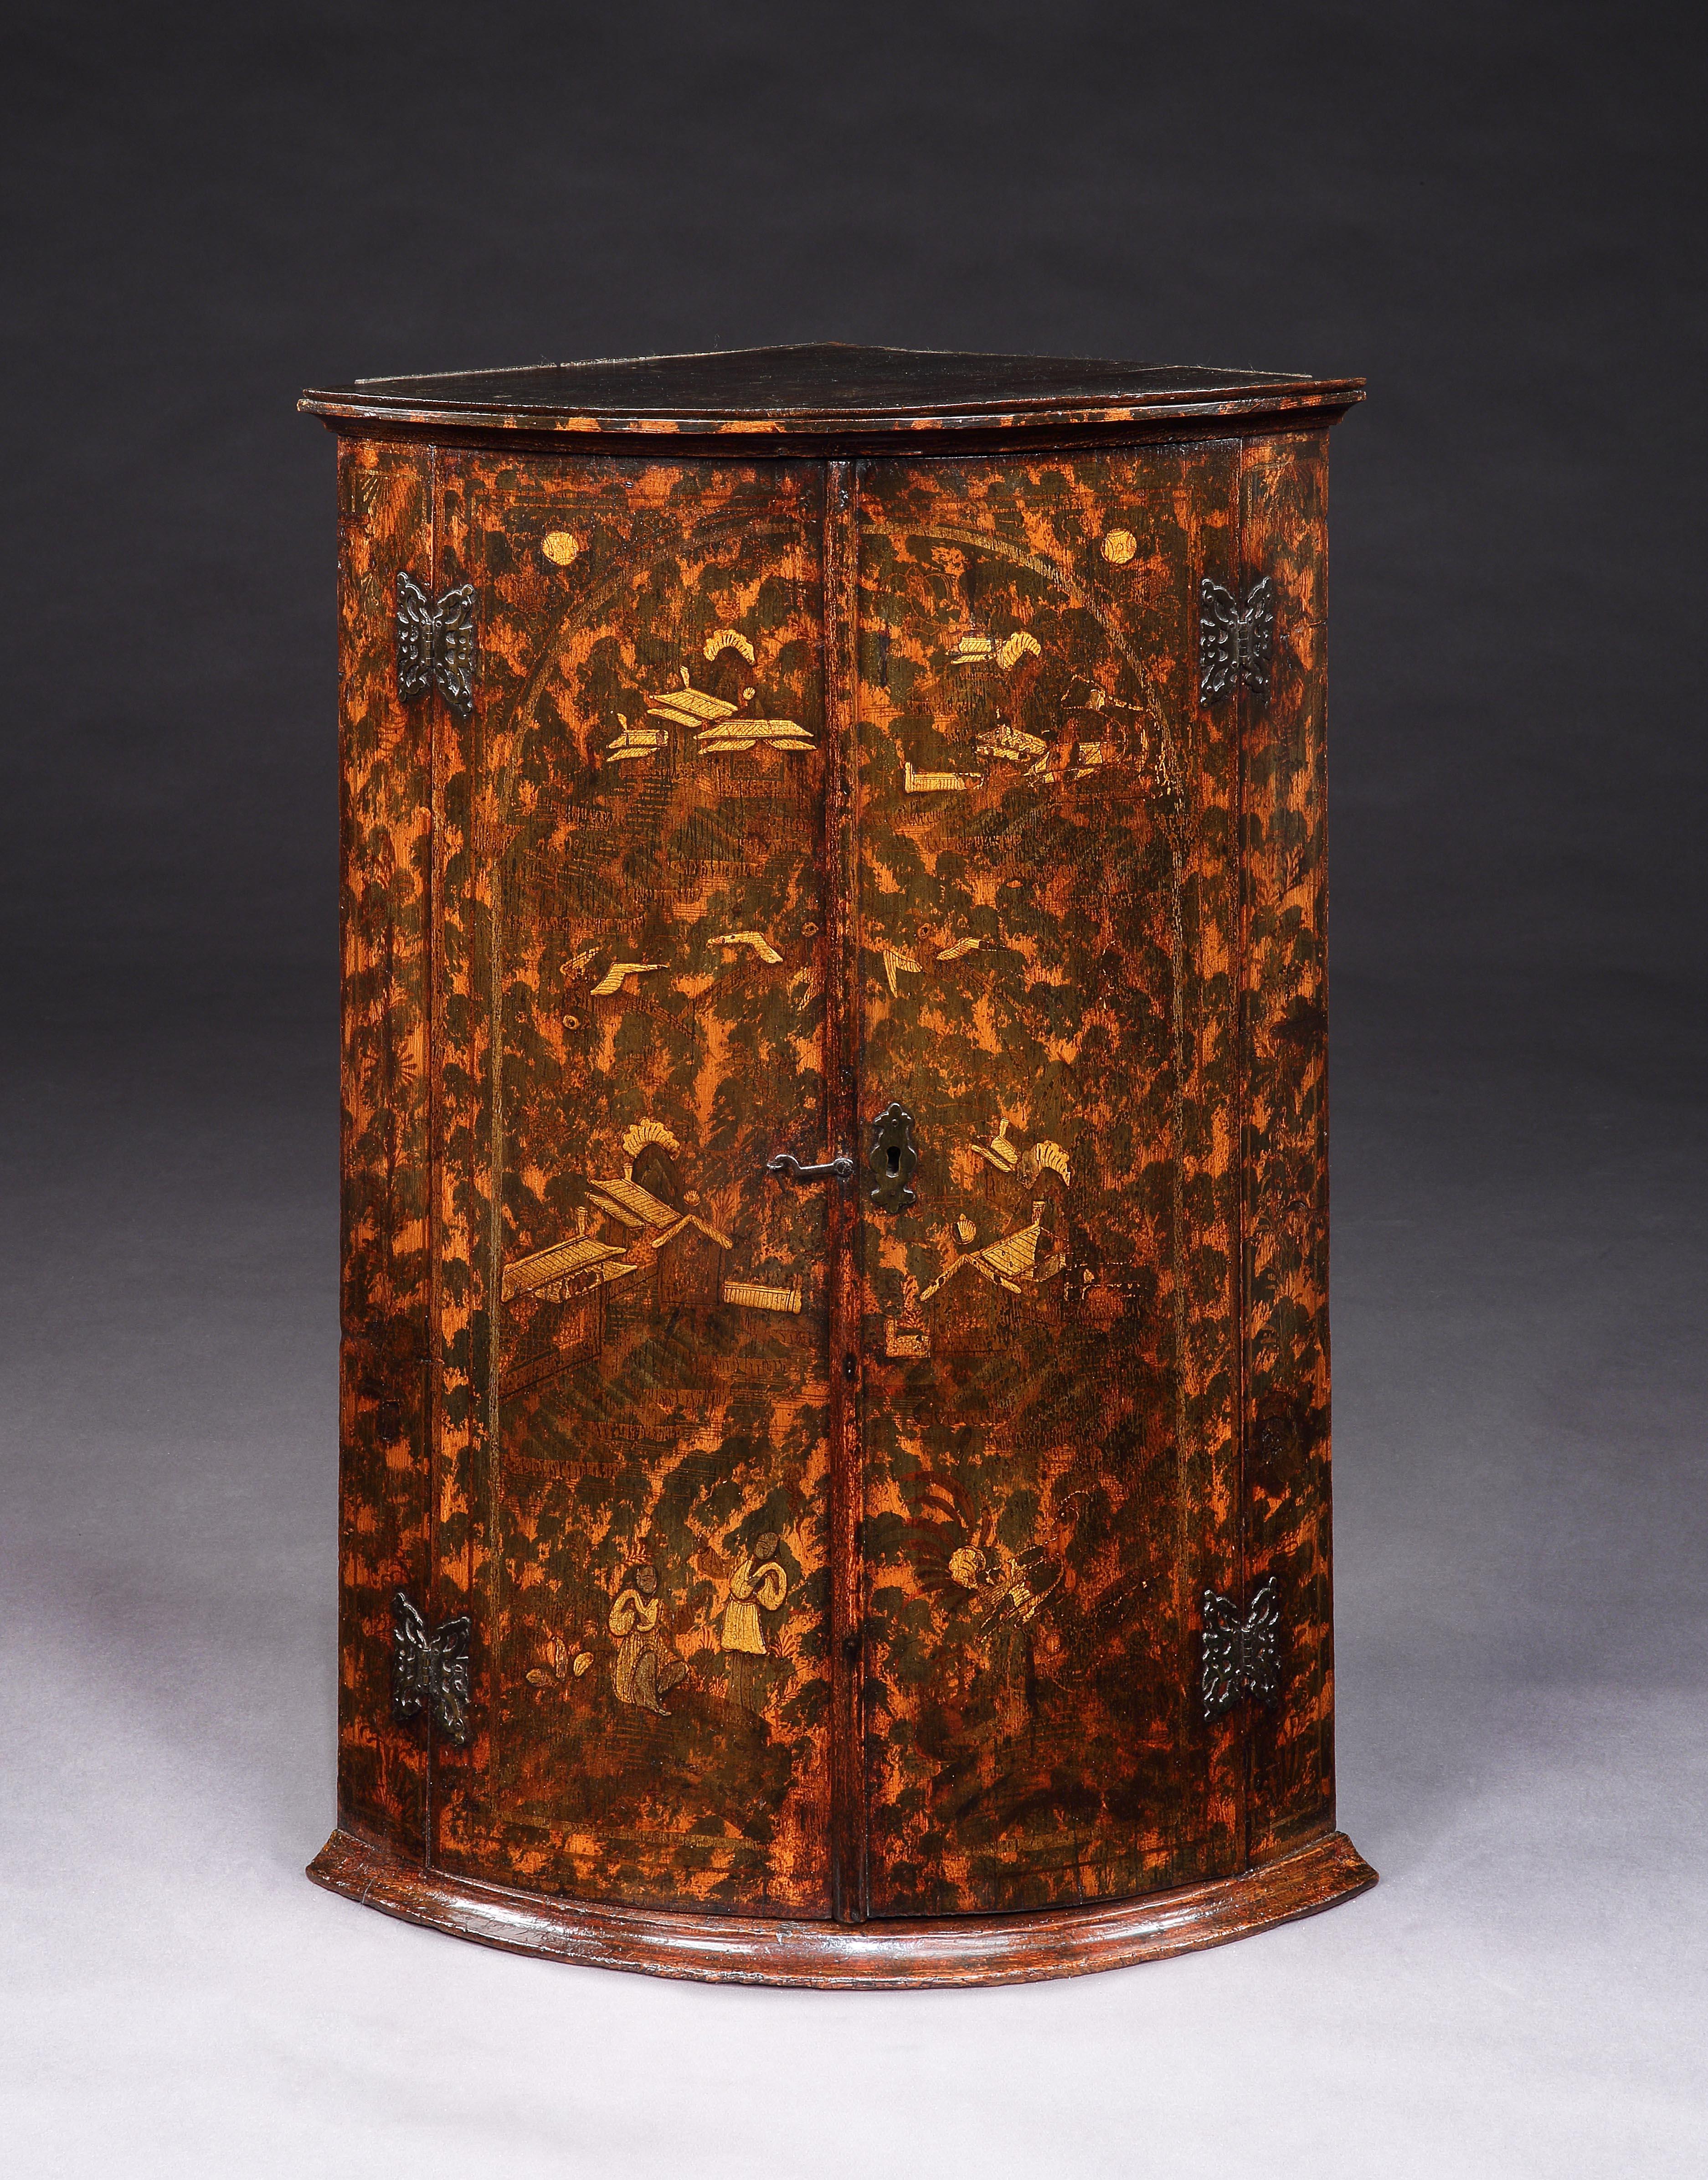 A RARE, LATE-17TH-EARLY-18TH CENTURY, HANGING CUPBOARD CORNER WITH GILDED CHINOISERIE JAPANNING & FAUX TORTOISHELL GROUND

- This corner cupboard is decorated in one of the most fashionable styles of the Baroque period, Chinese lacquer with gilded